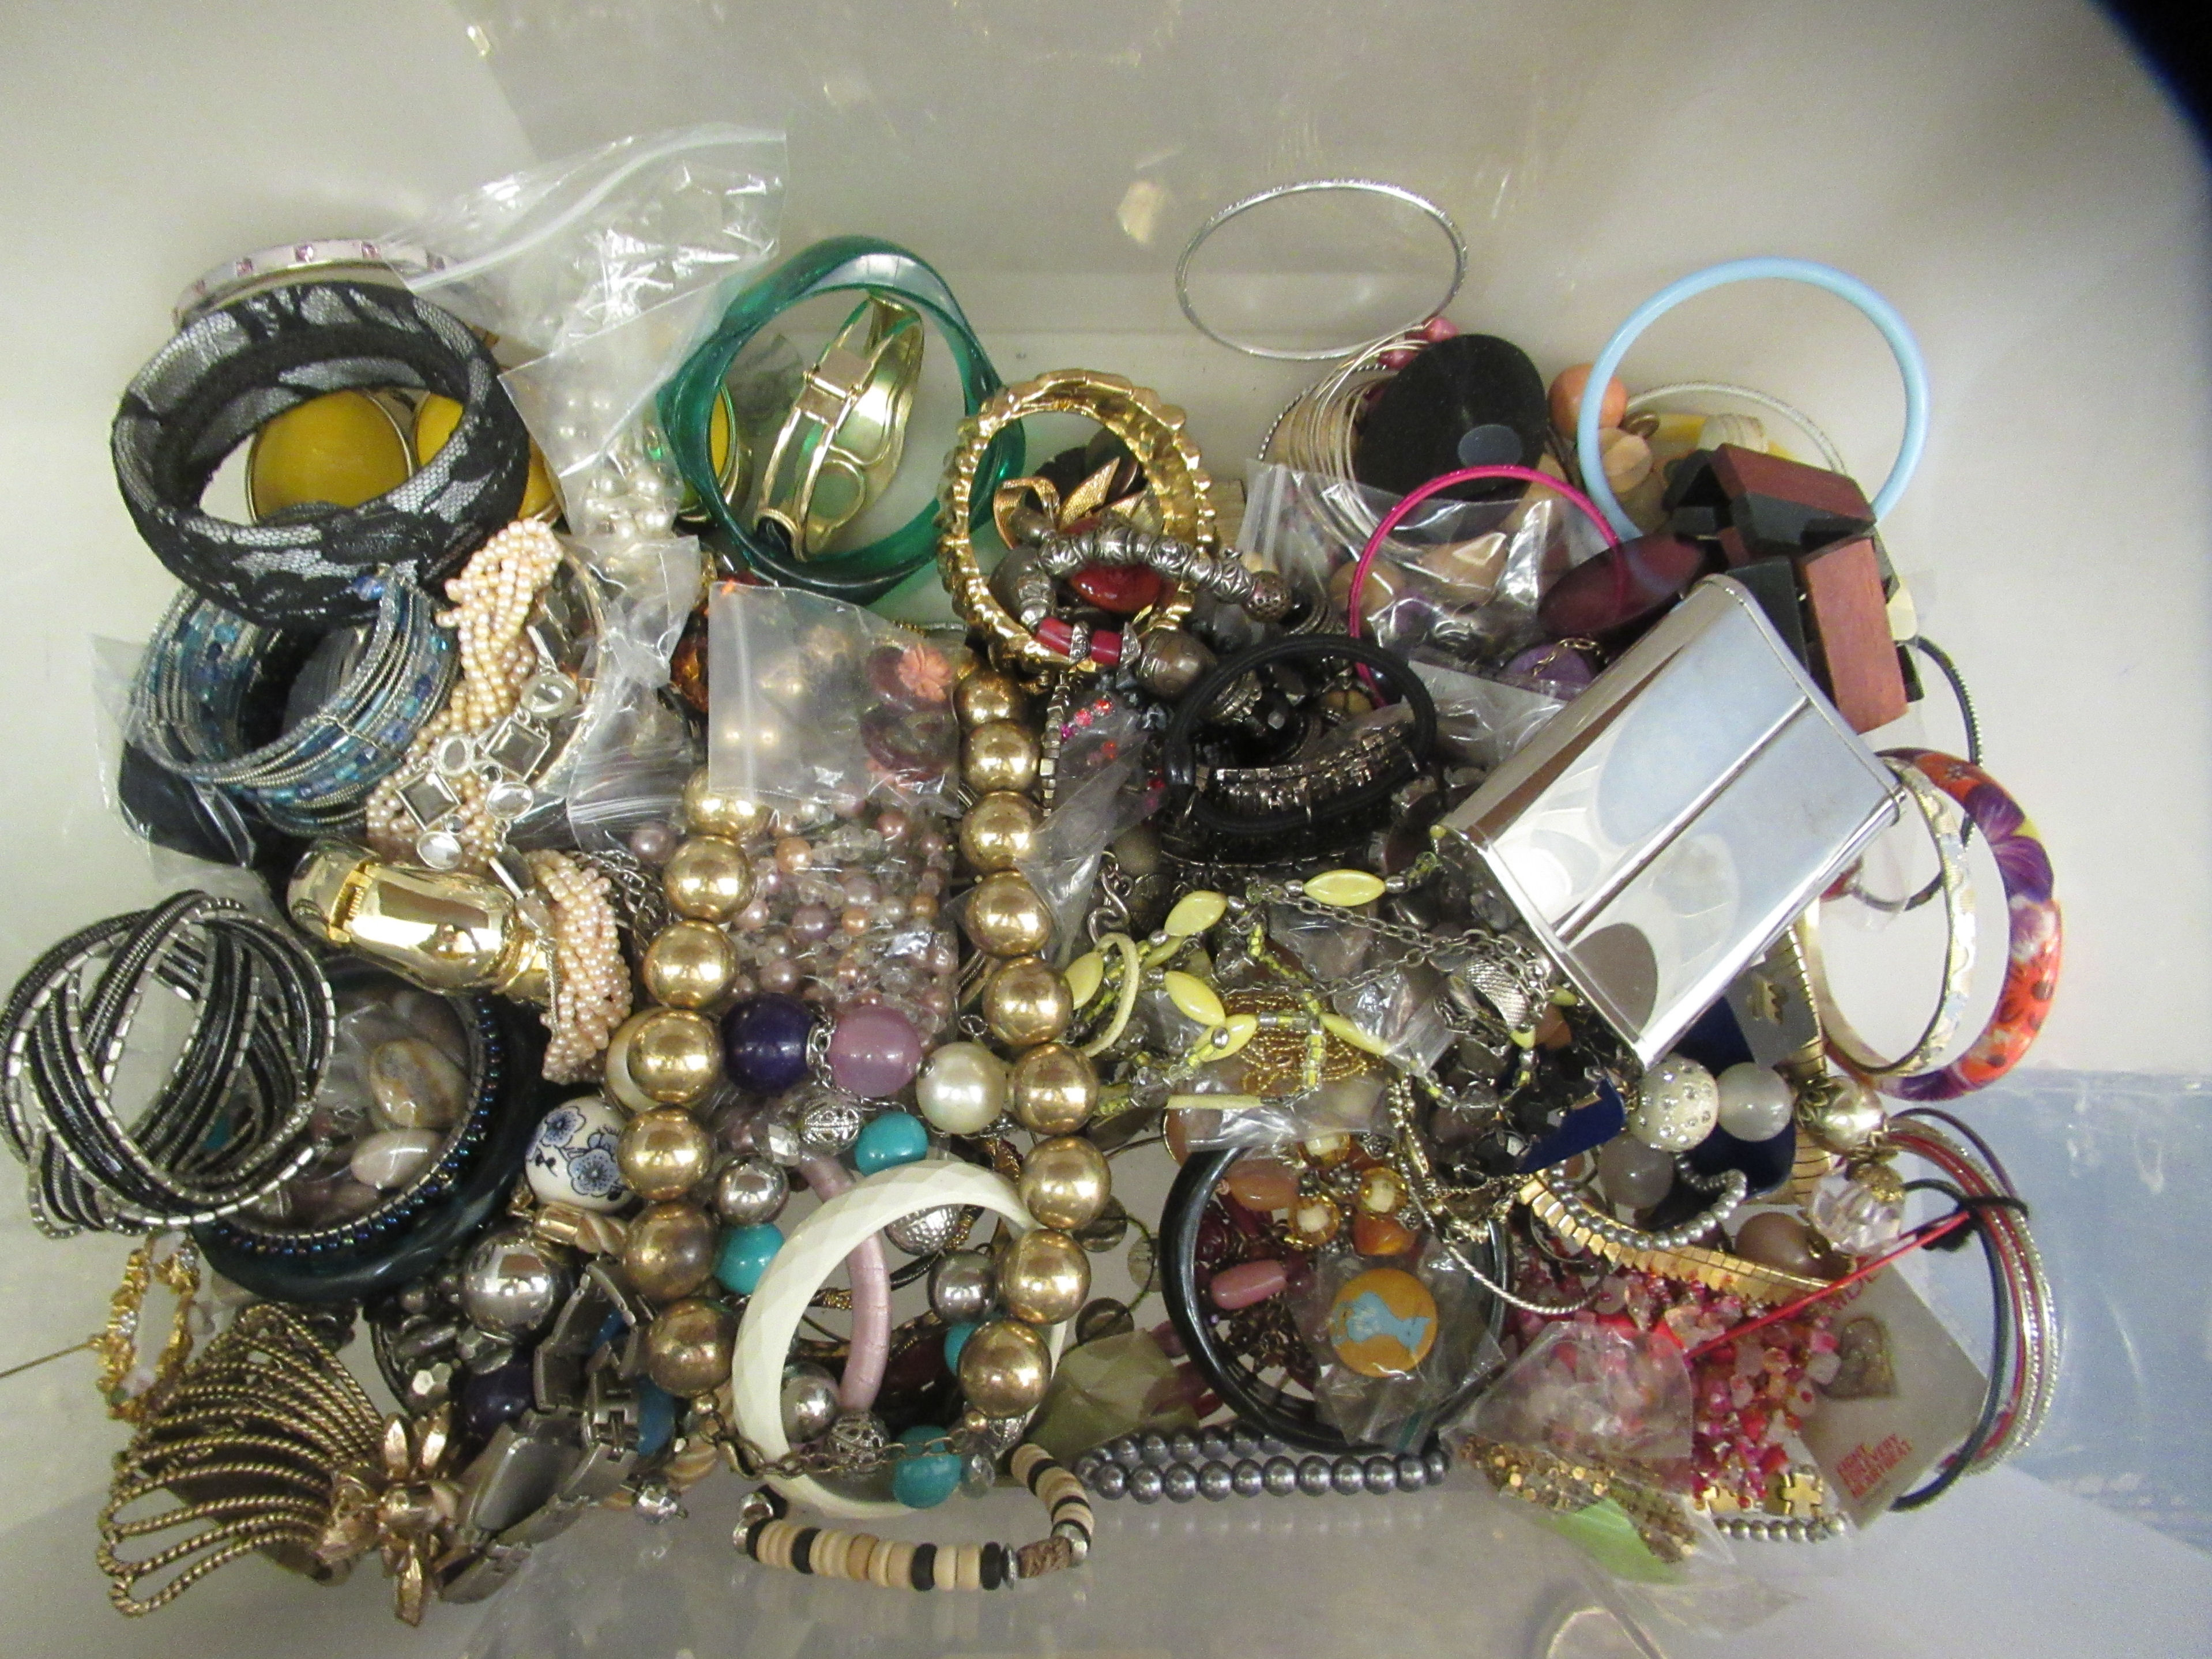 Costume jewellery and other items of personal ornament: to include bangles and necklaces - Image 2 of 2